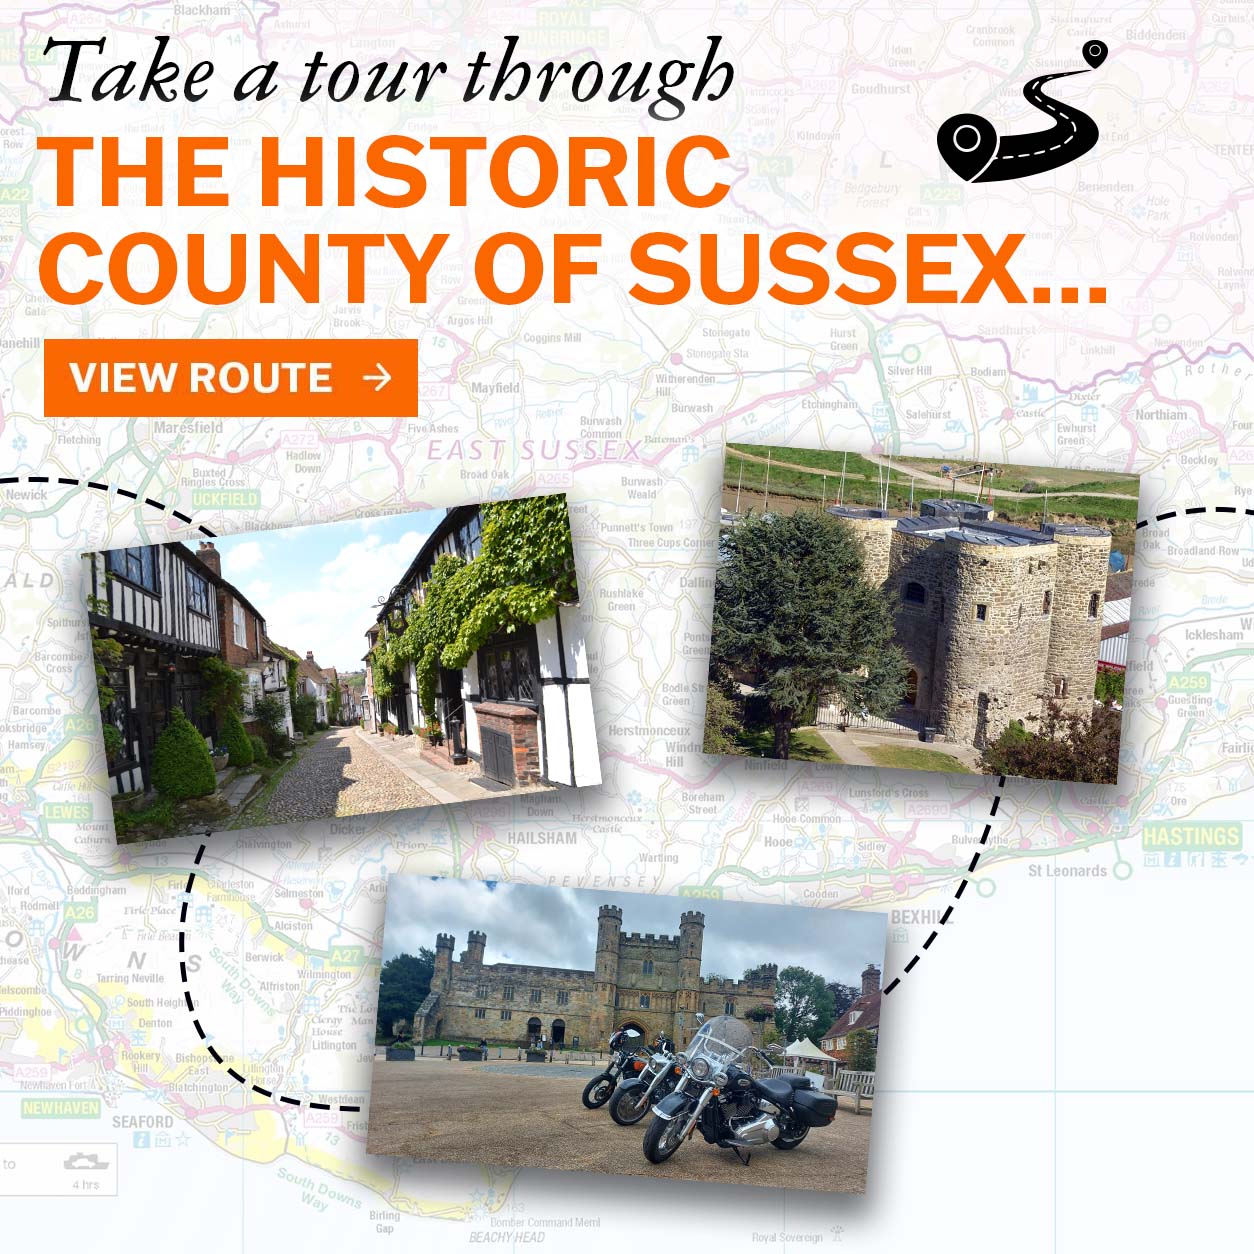 Recommended motorcycle ride route through Sussex